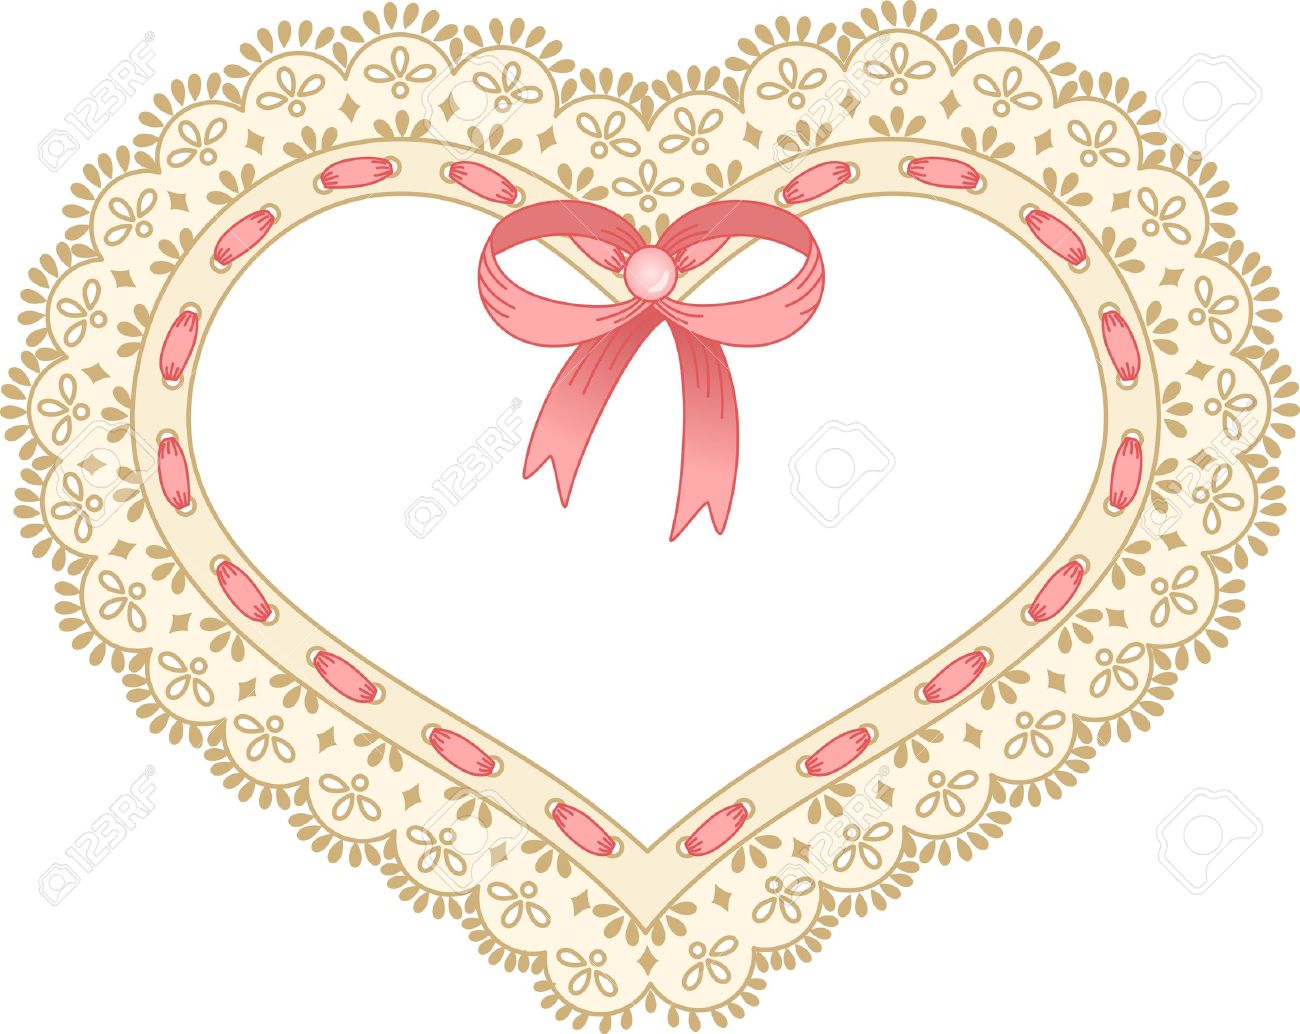 embroidery clipart sites - photo #39